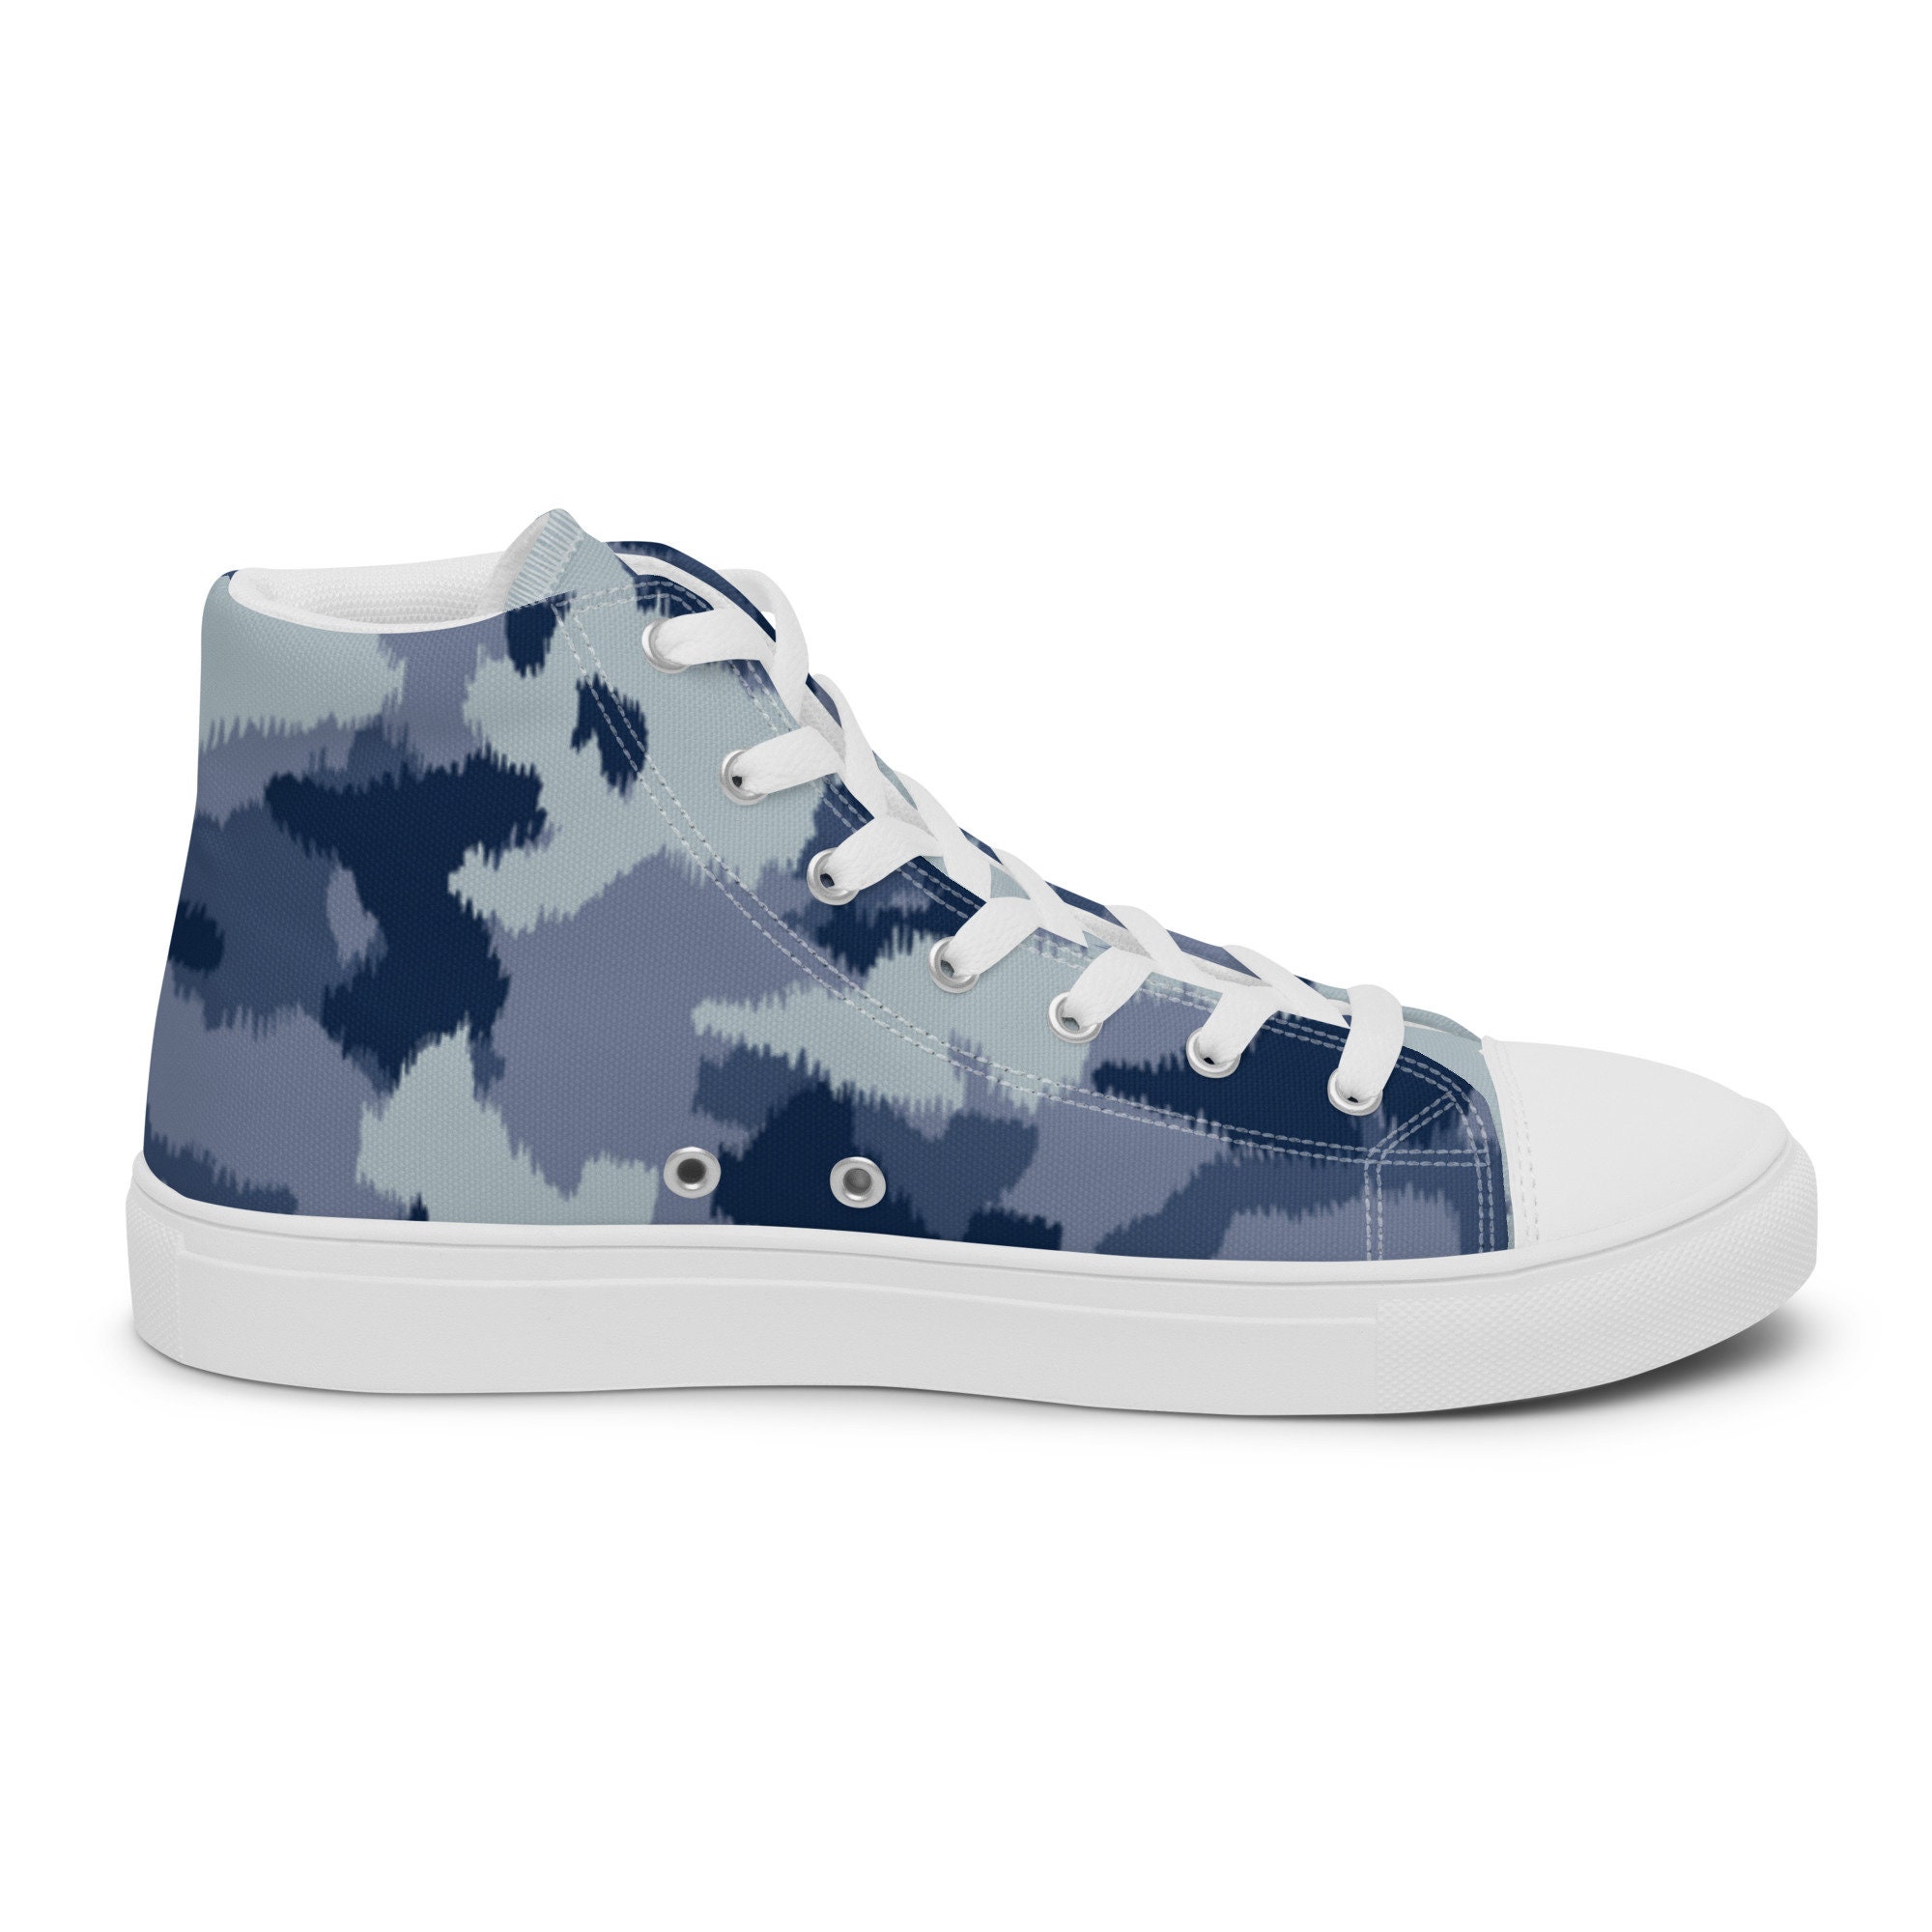 Blue Camo Shoes, Camo Sneakers, Colorful Men's High Top Sneakers sold ...